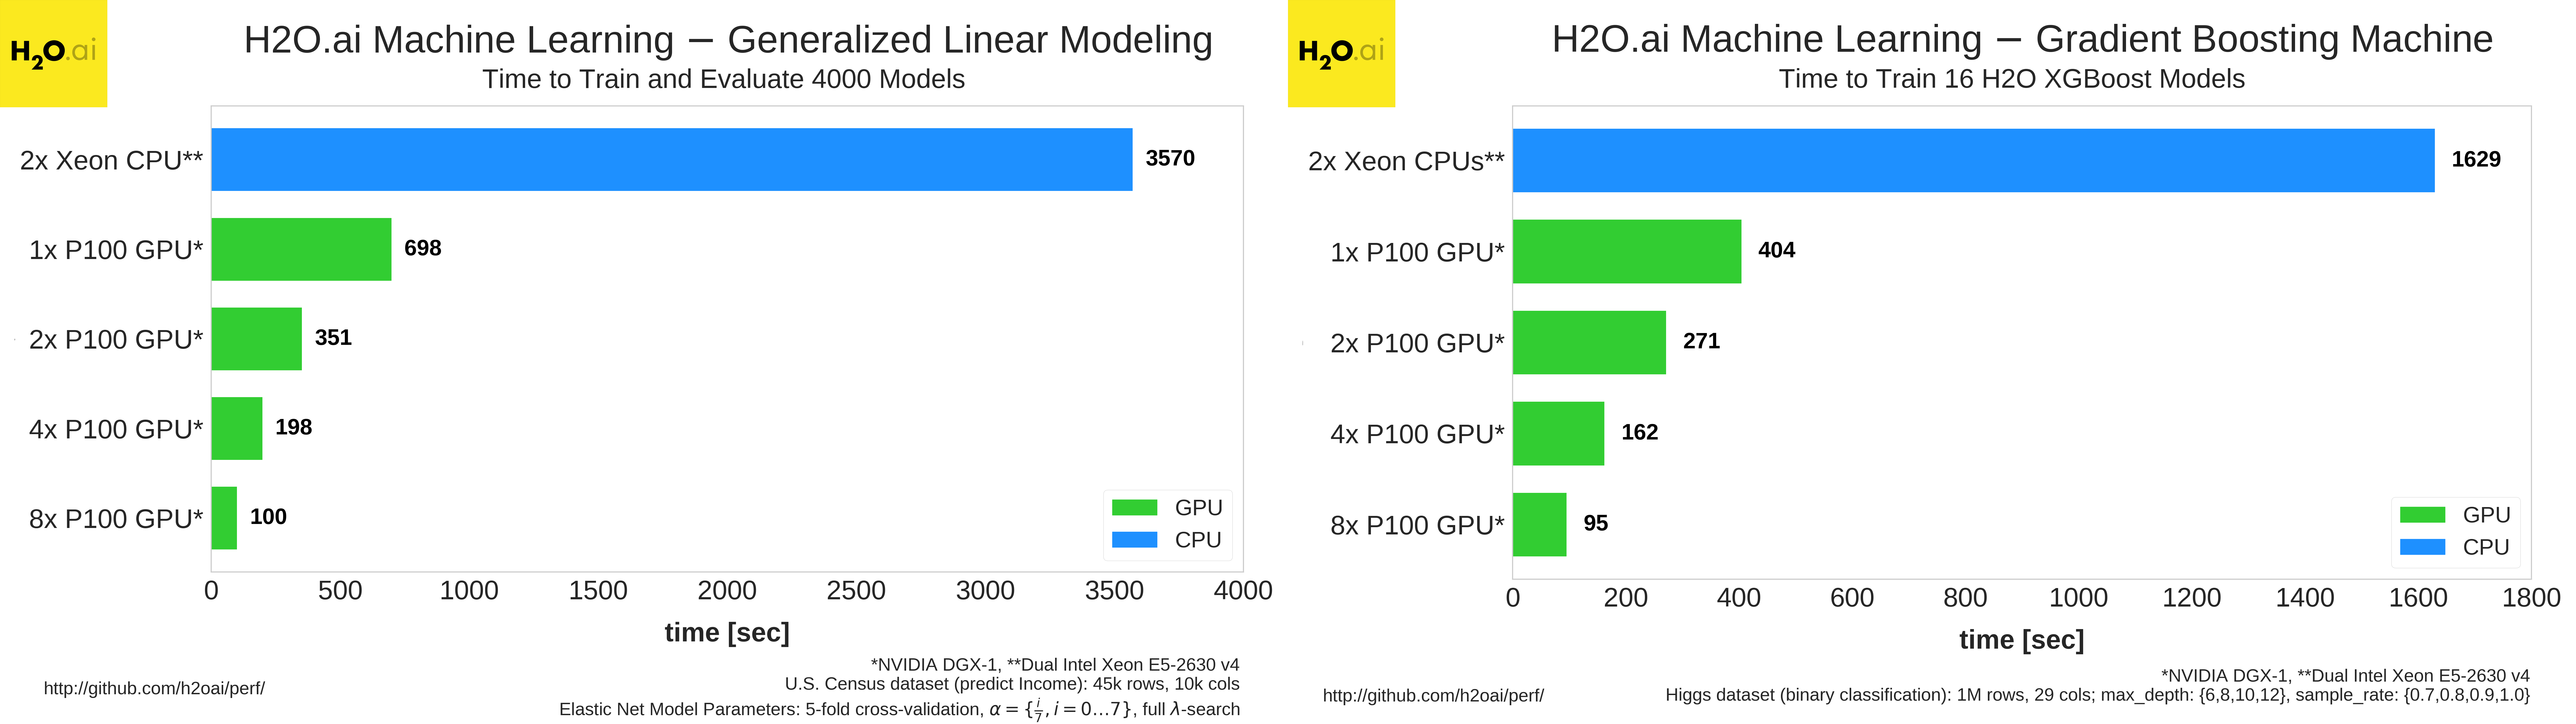 The World's fastest Machine Learning on GPUs for Generalized Linear Modeling (GLM) and Gradient Boosting Machines (GBM)